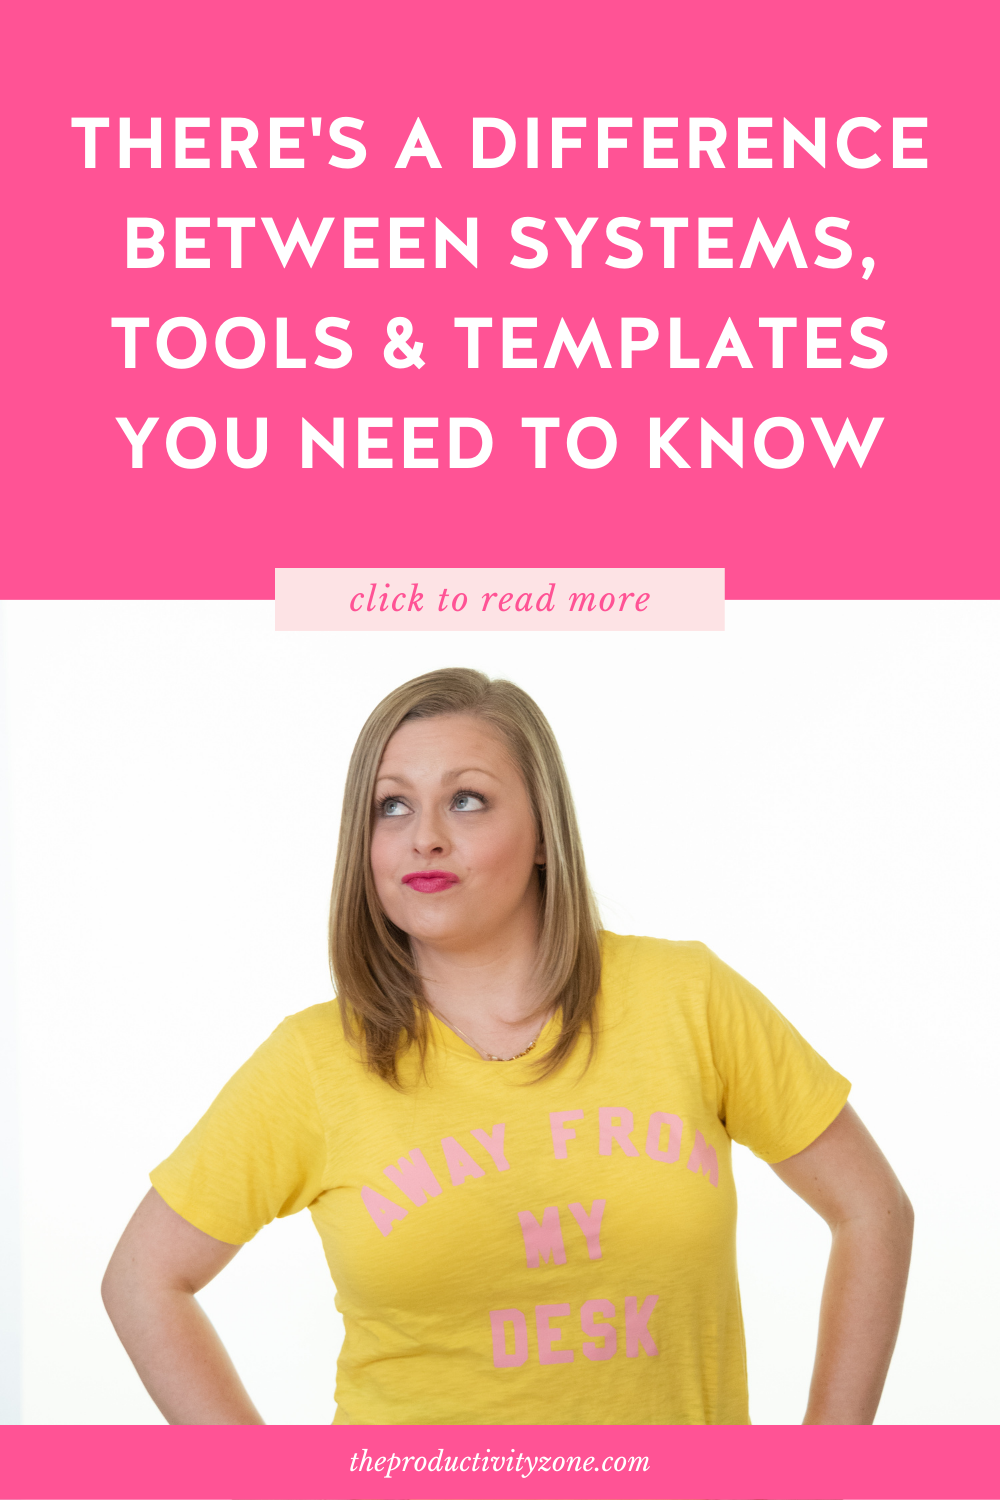 Text graphic featuring white text on a hot pink background with a girl in a yellow shirt giving the text a sassy look. The text reads: "There's a Difference Between Systems, Tools & Templates You Need to Know"